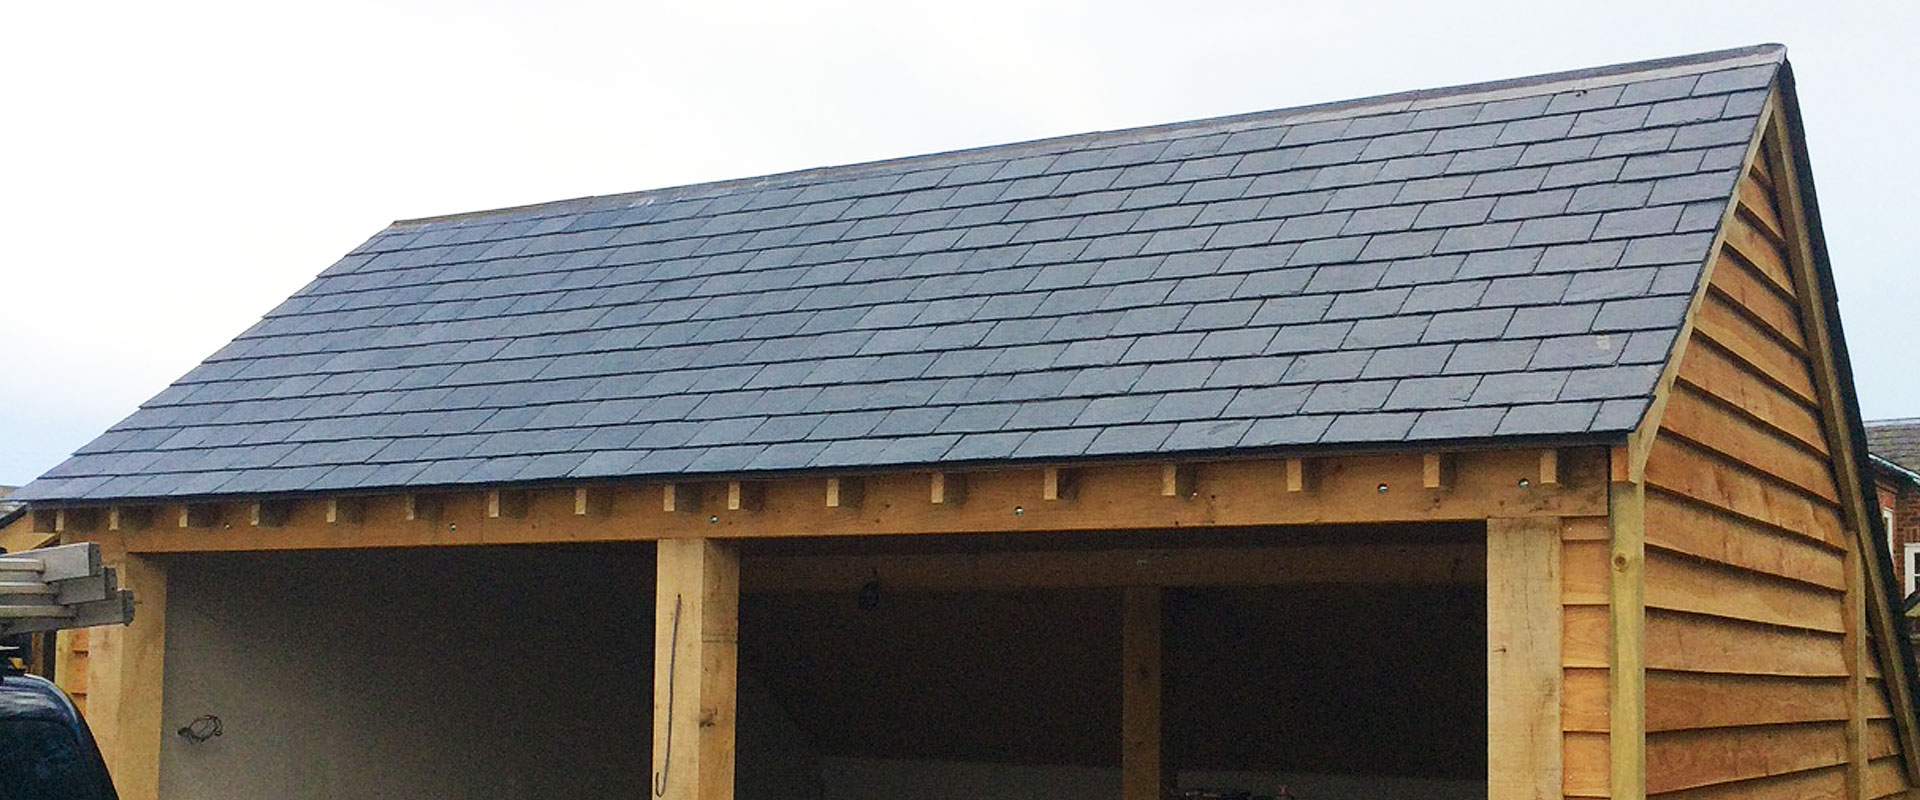 Willow Roofing Slate Roof